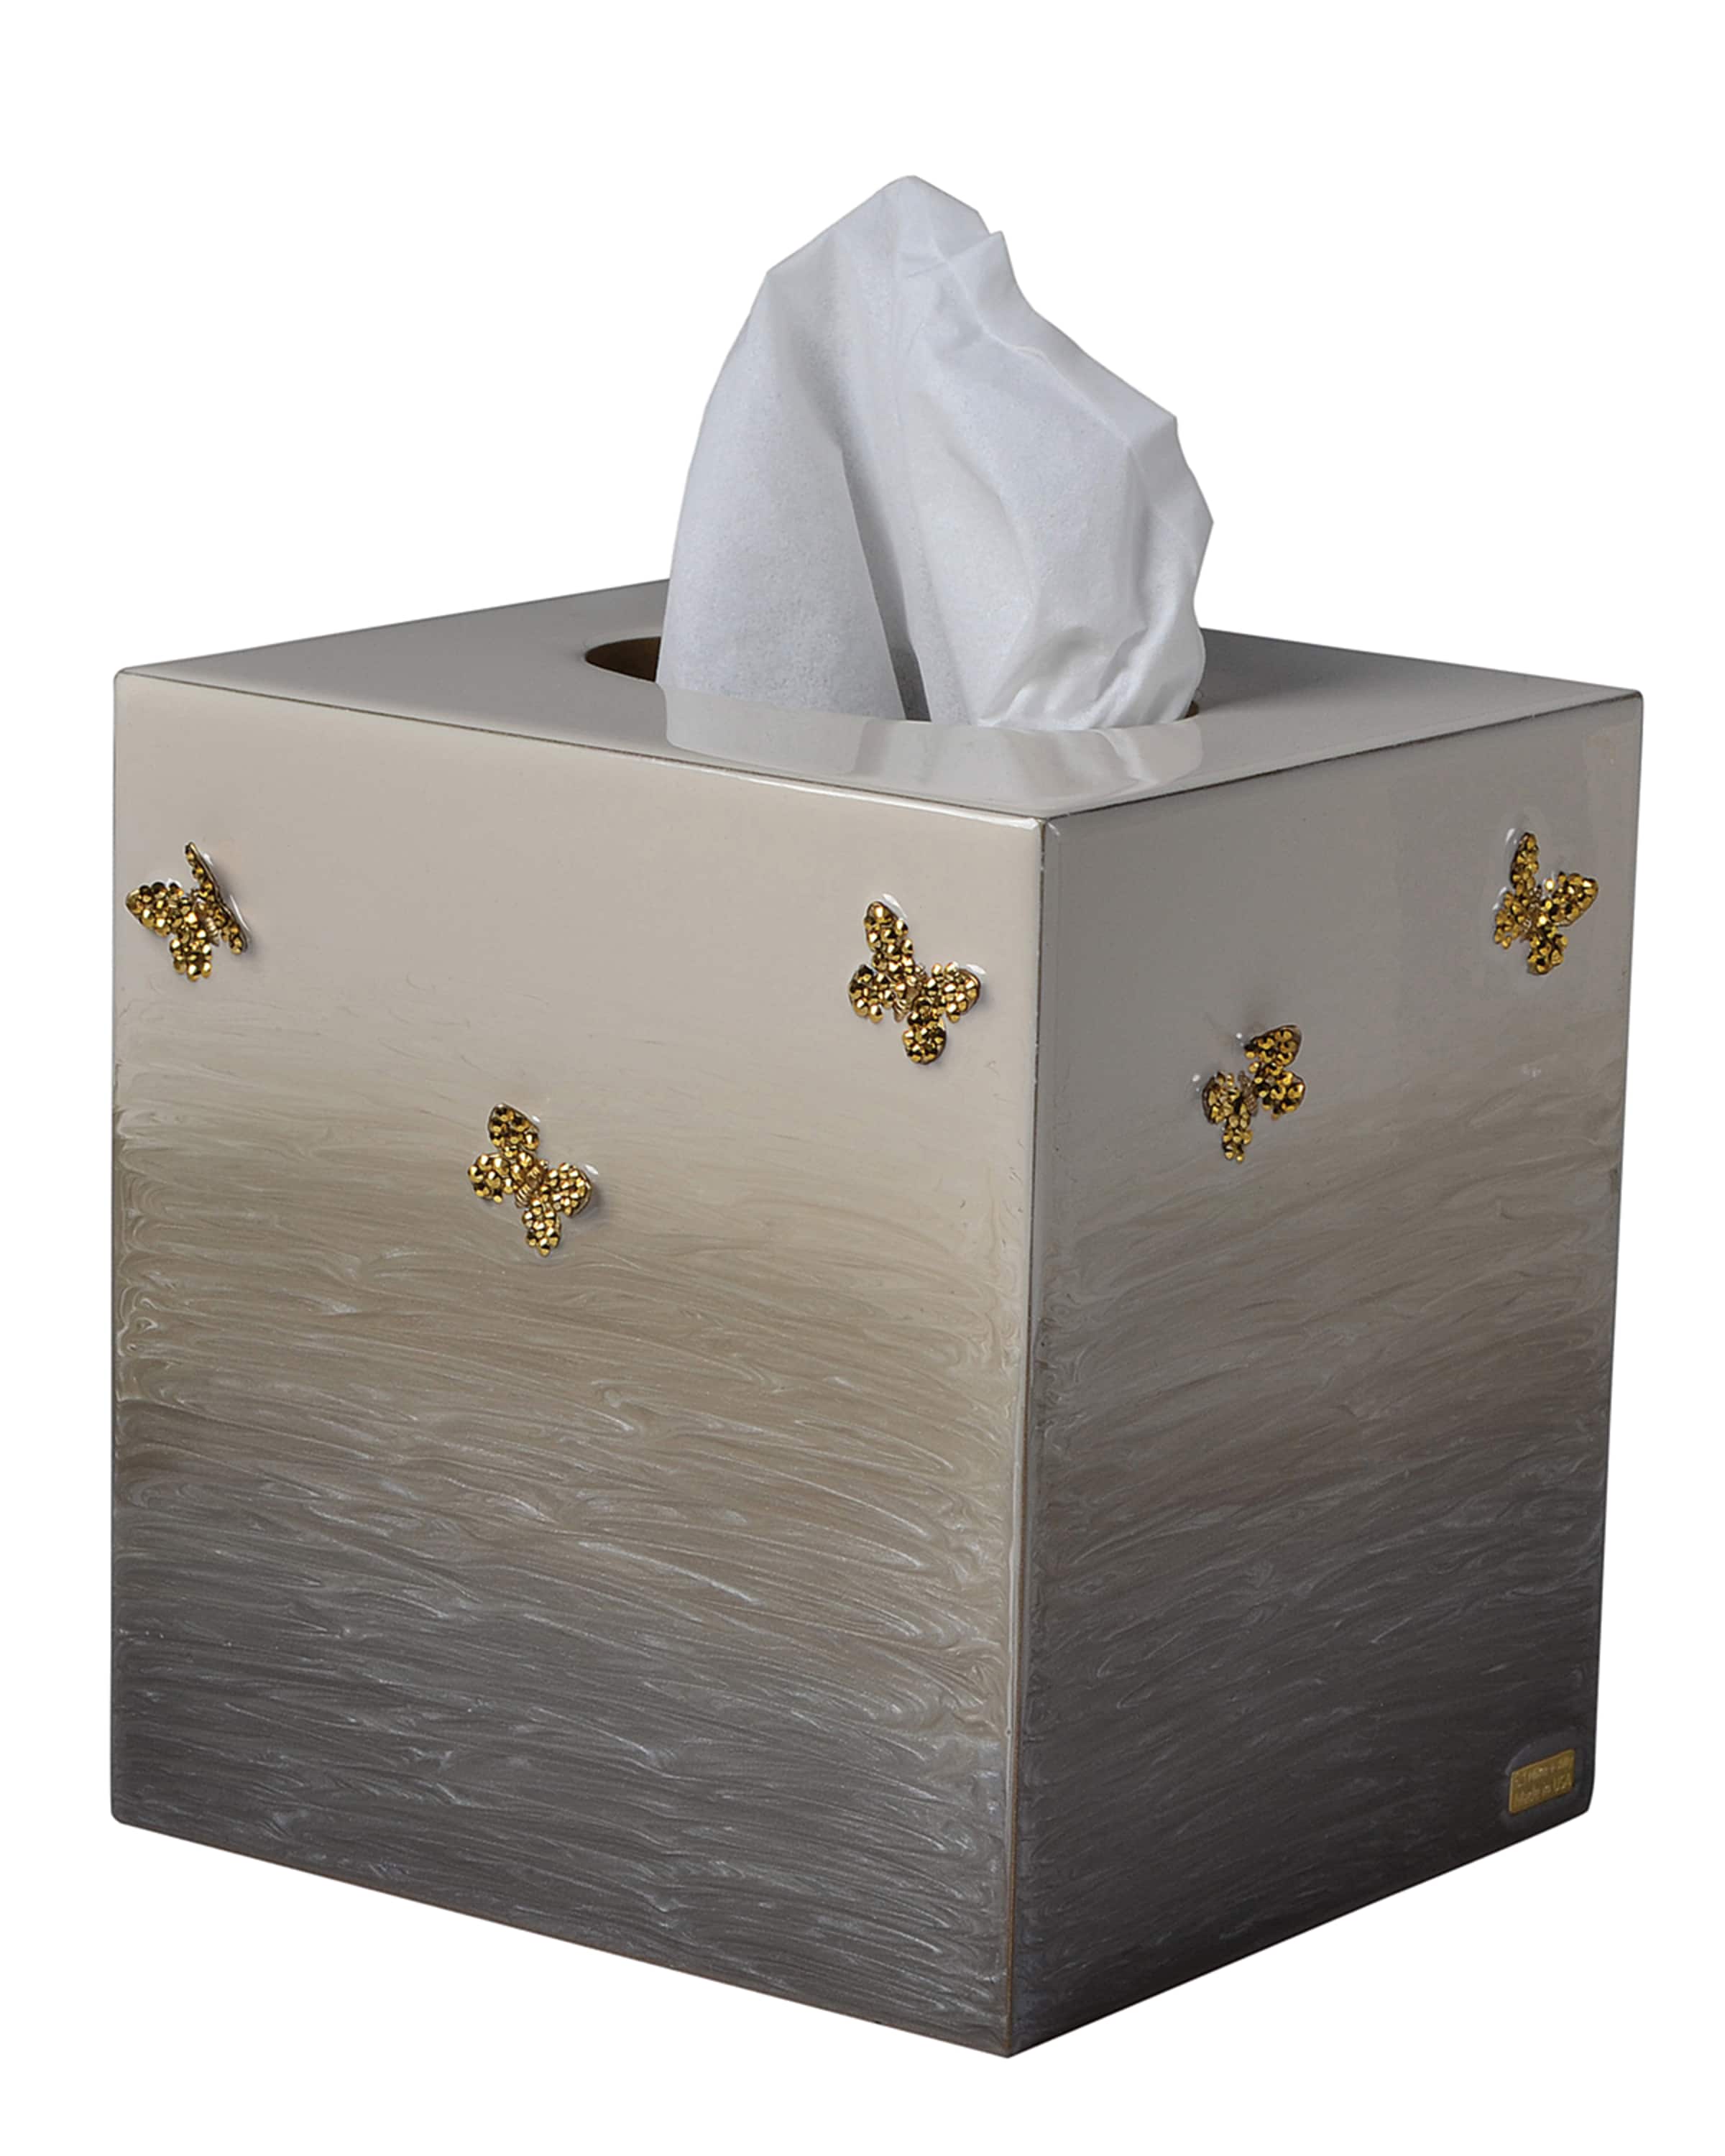 Mike & Ally Breeze Boutique Tissue Box Holder